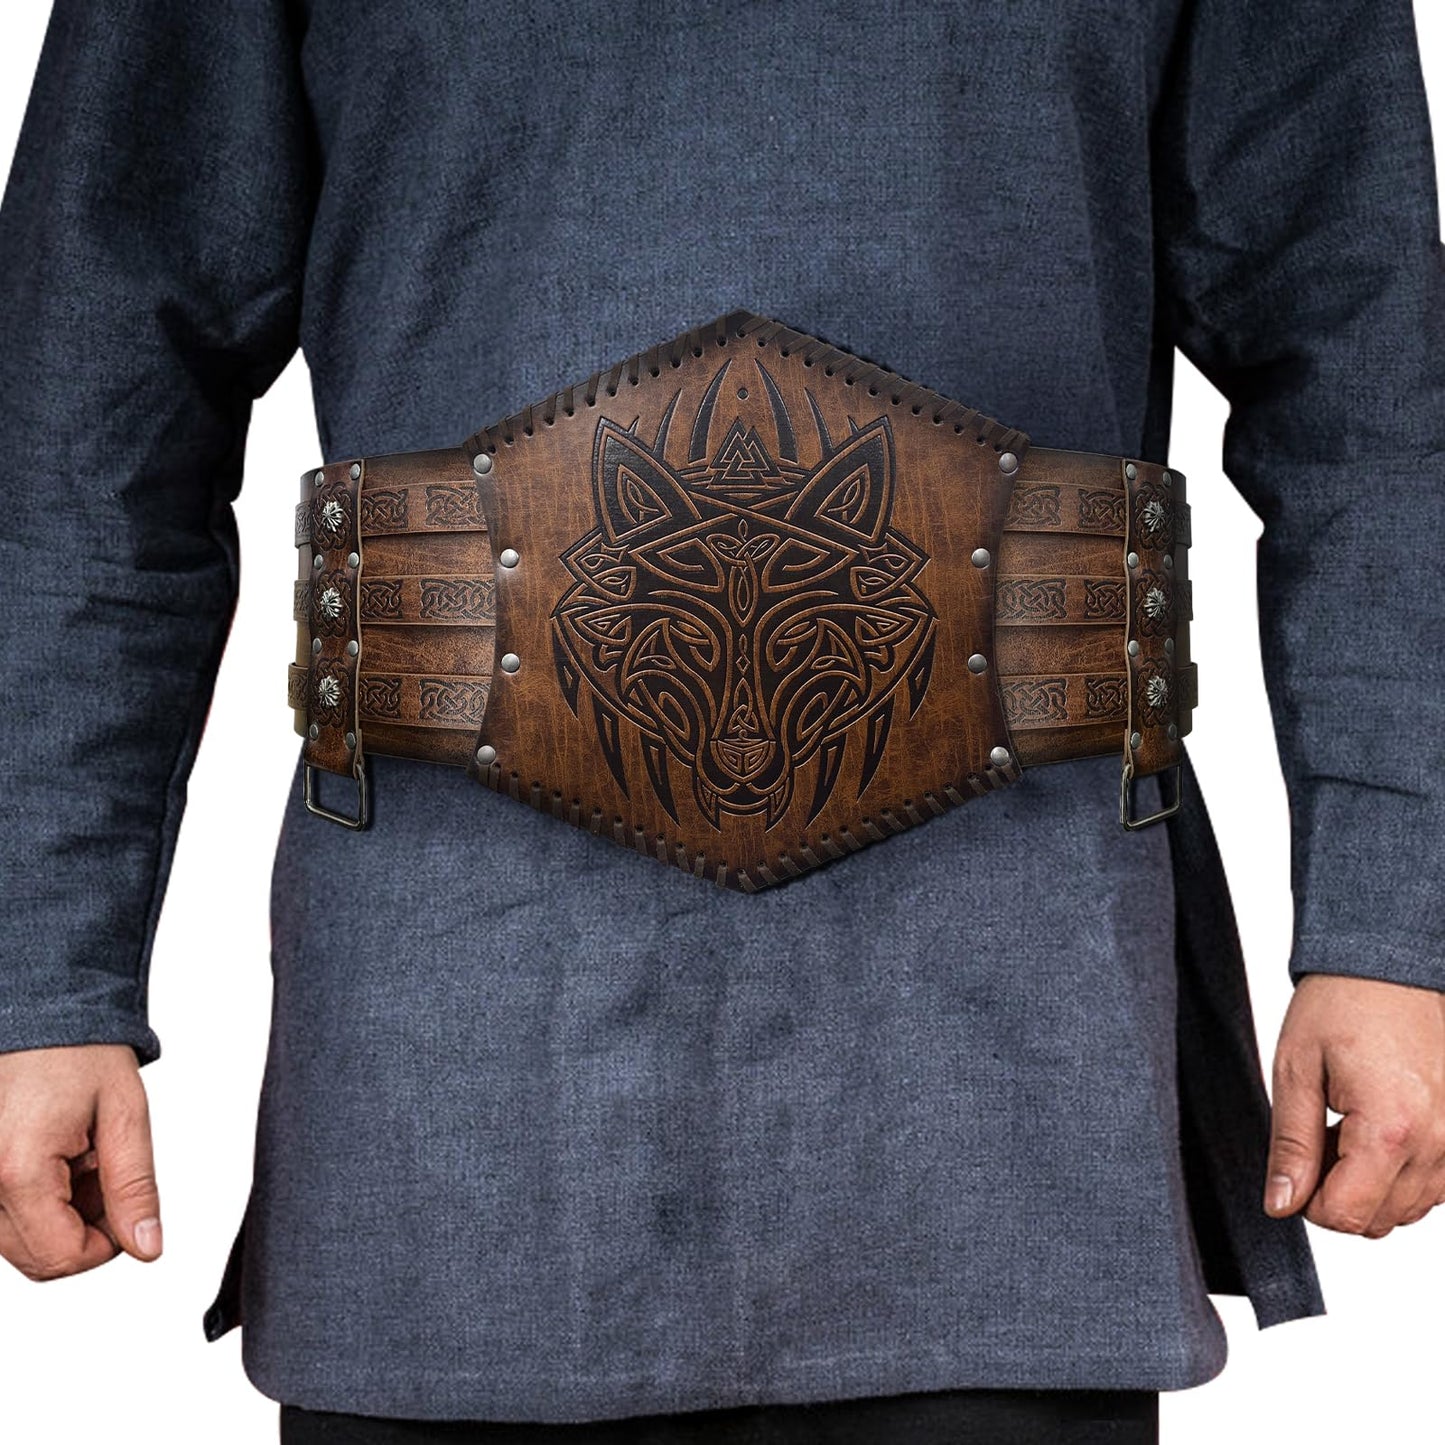 HiiFeuer Viking Fenrir Gauntlet with Embossed Chest Armor and Nordic Wide Belt, Medieval Faux Leather Warrior Set for LARP Ren Faire